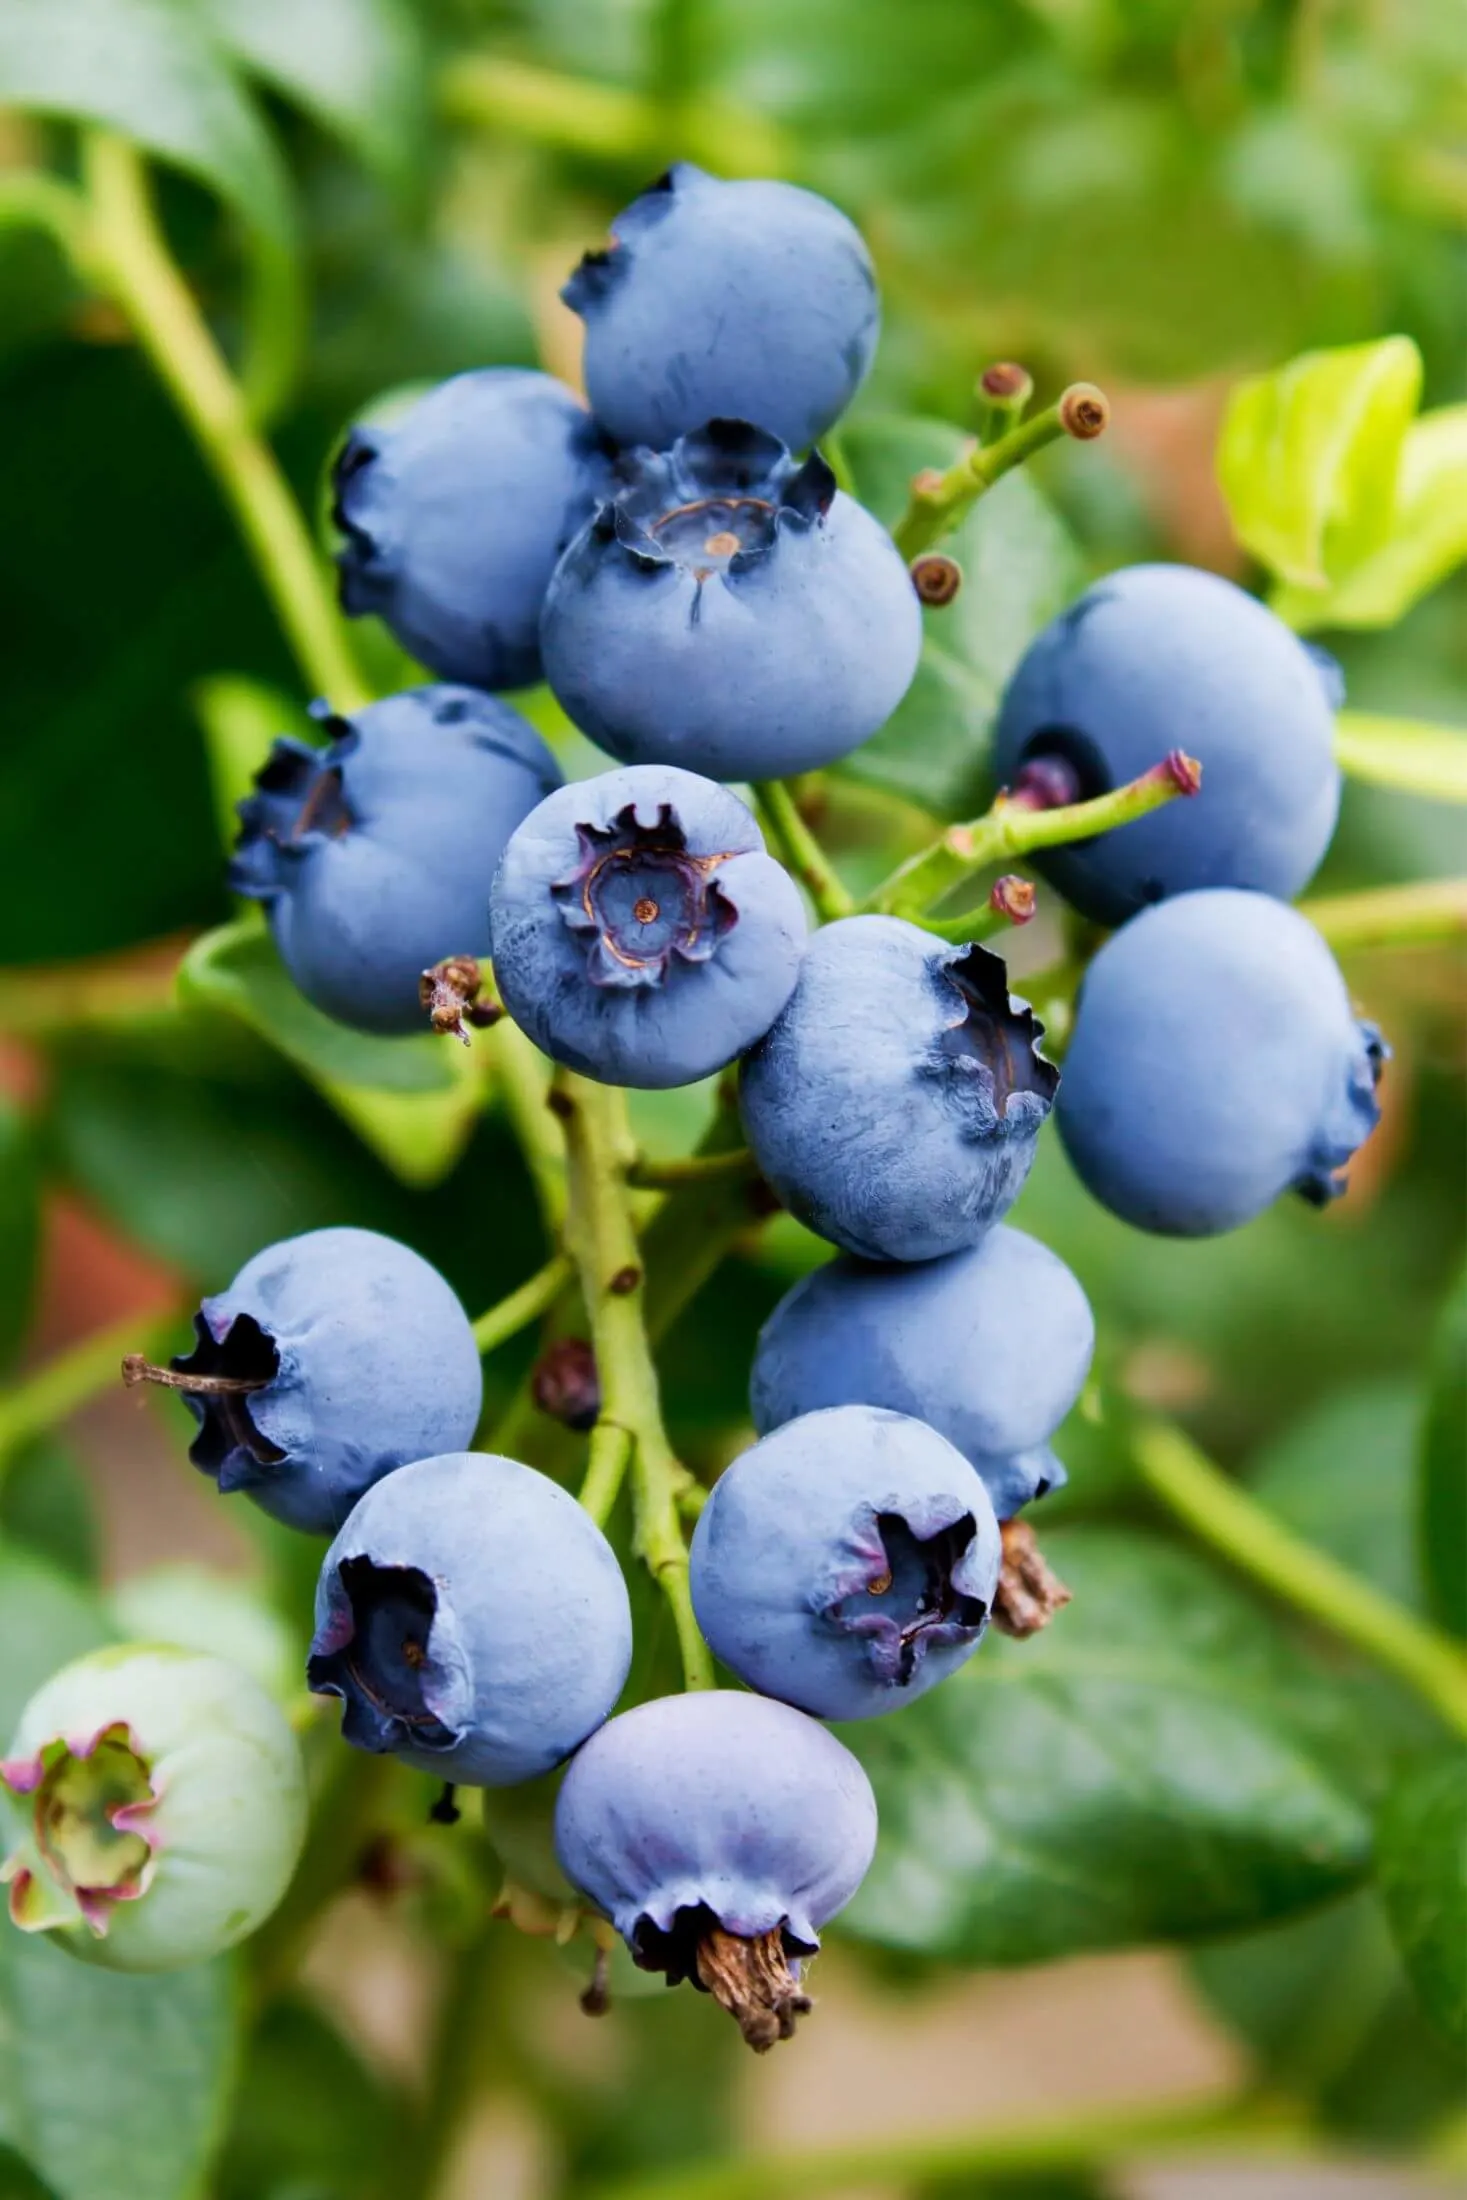 Dusty blue colored berries on a plant. 